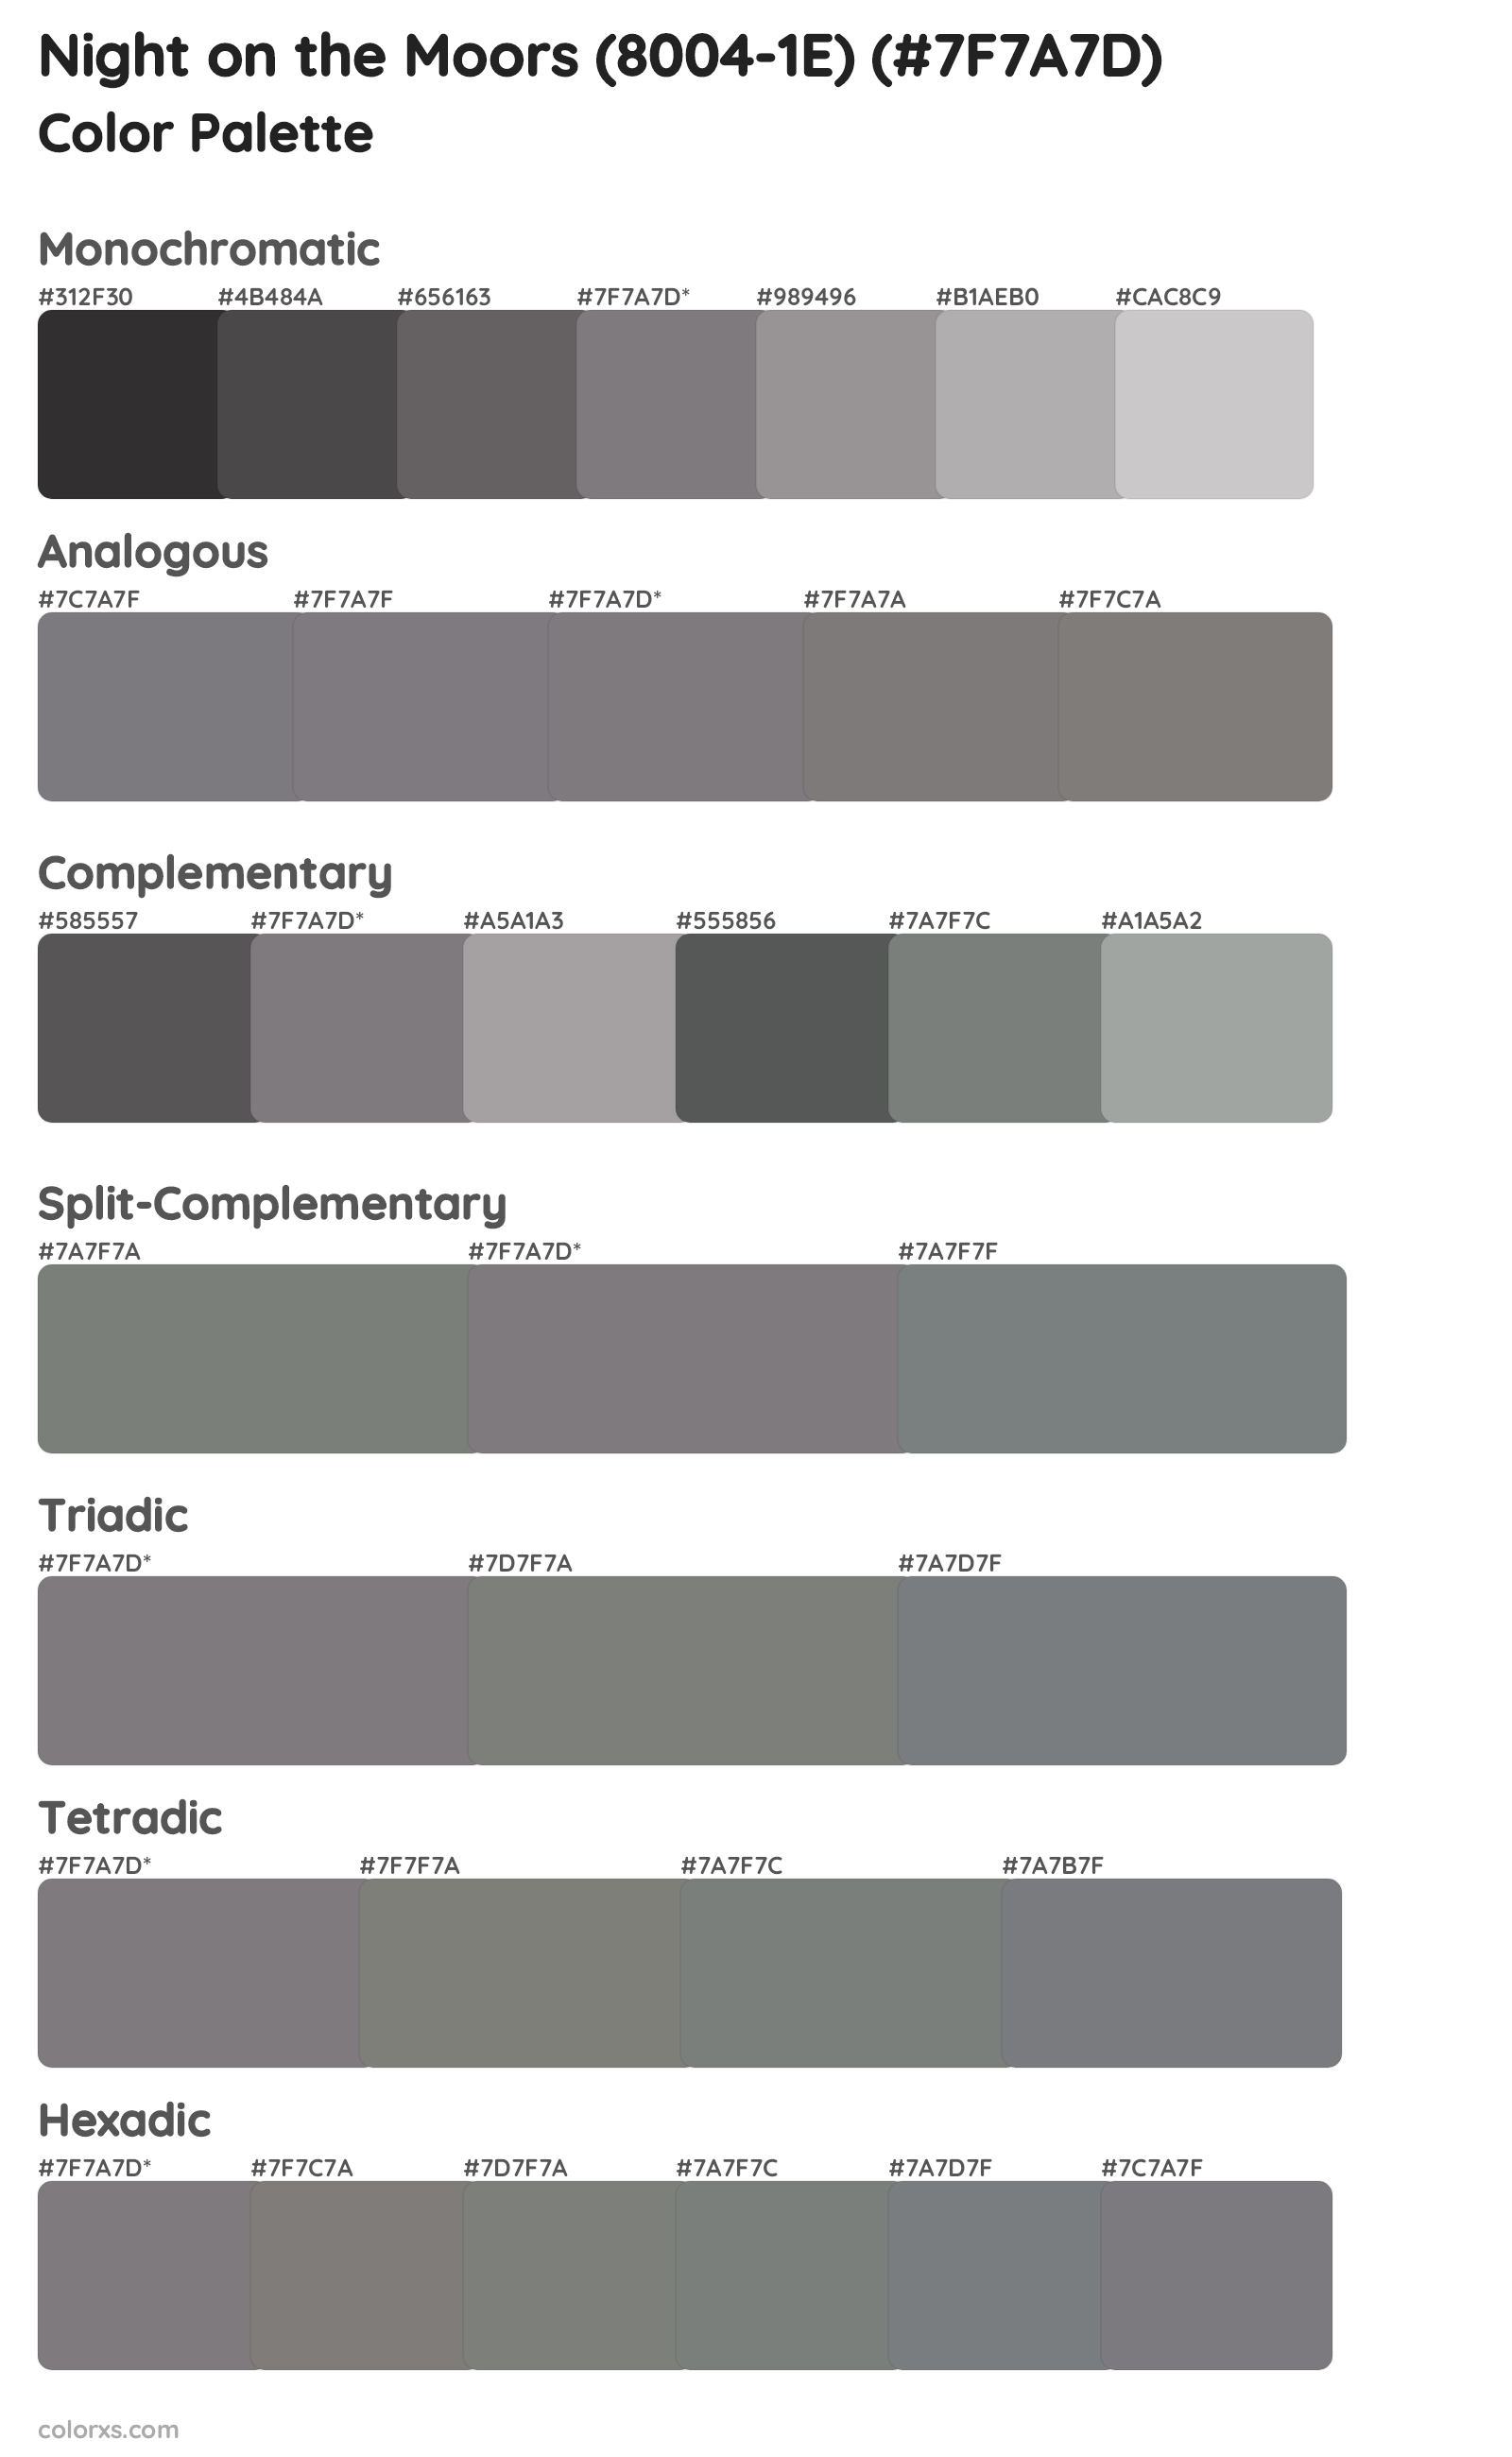 Night on the Moors (8004-1E) Color Scheme Palettes